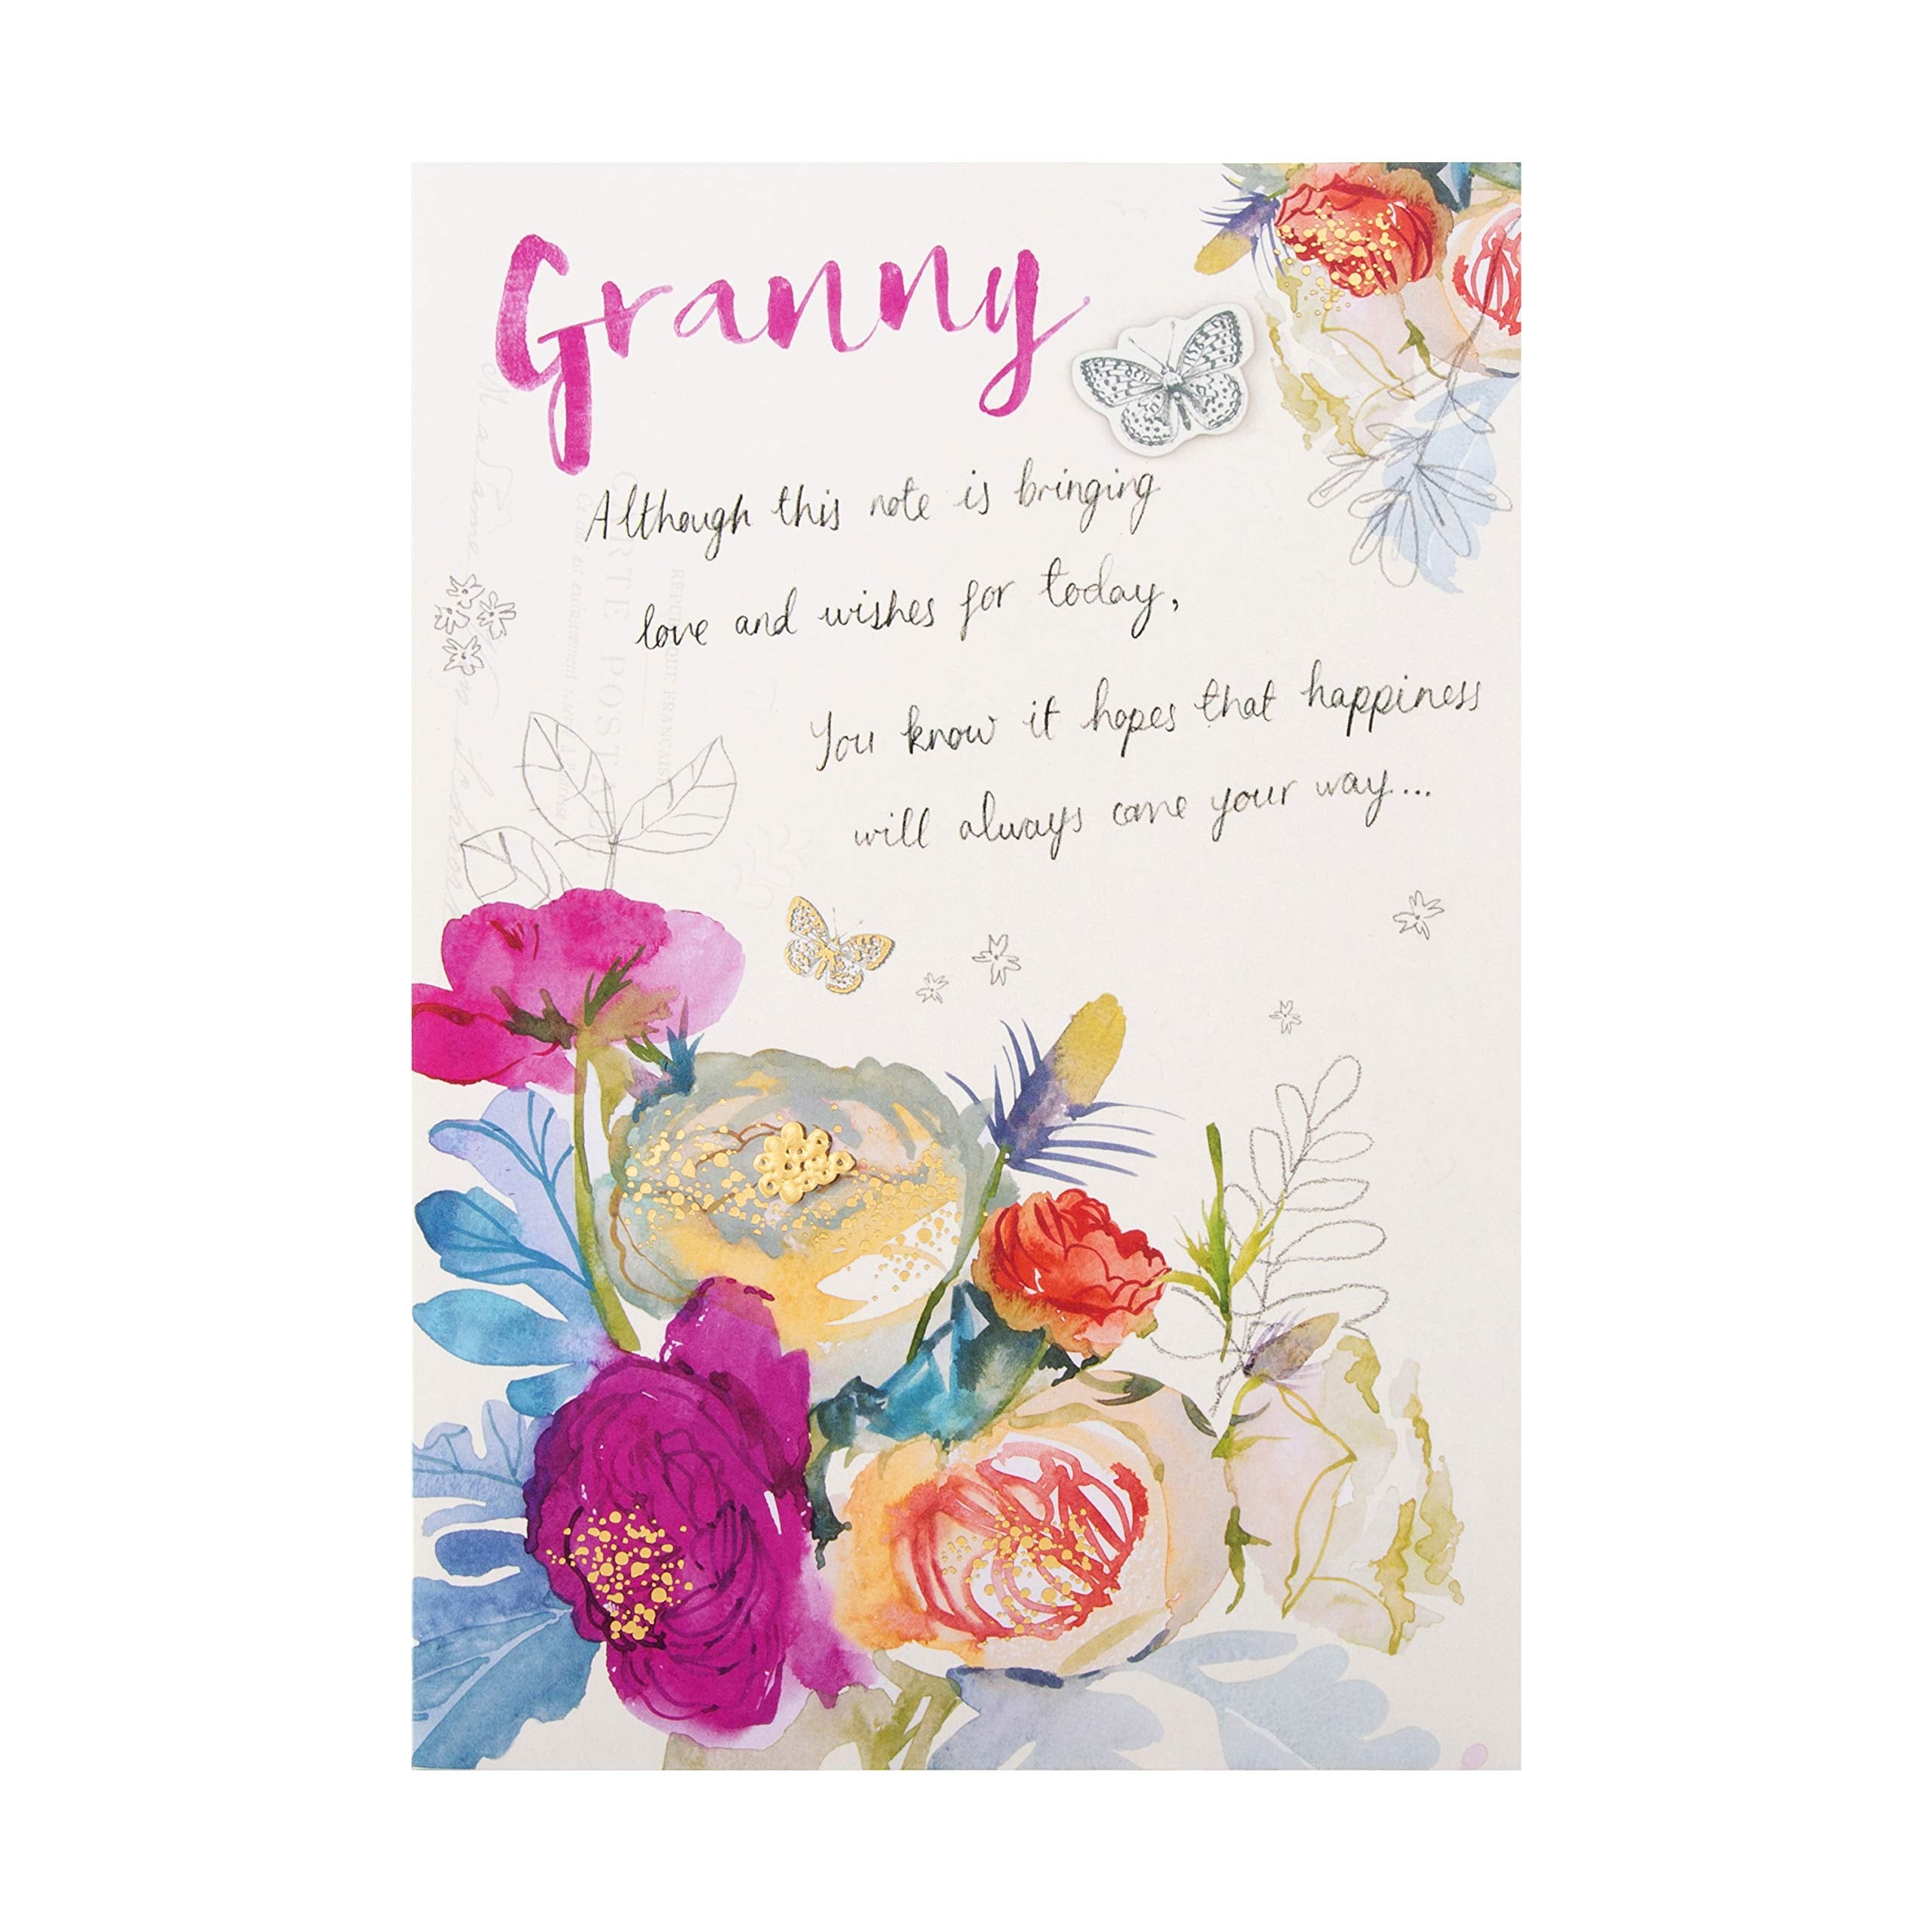 Hallmark Mothers Day Card for Granny - Classic Floral Design